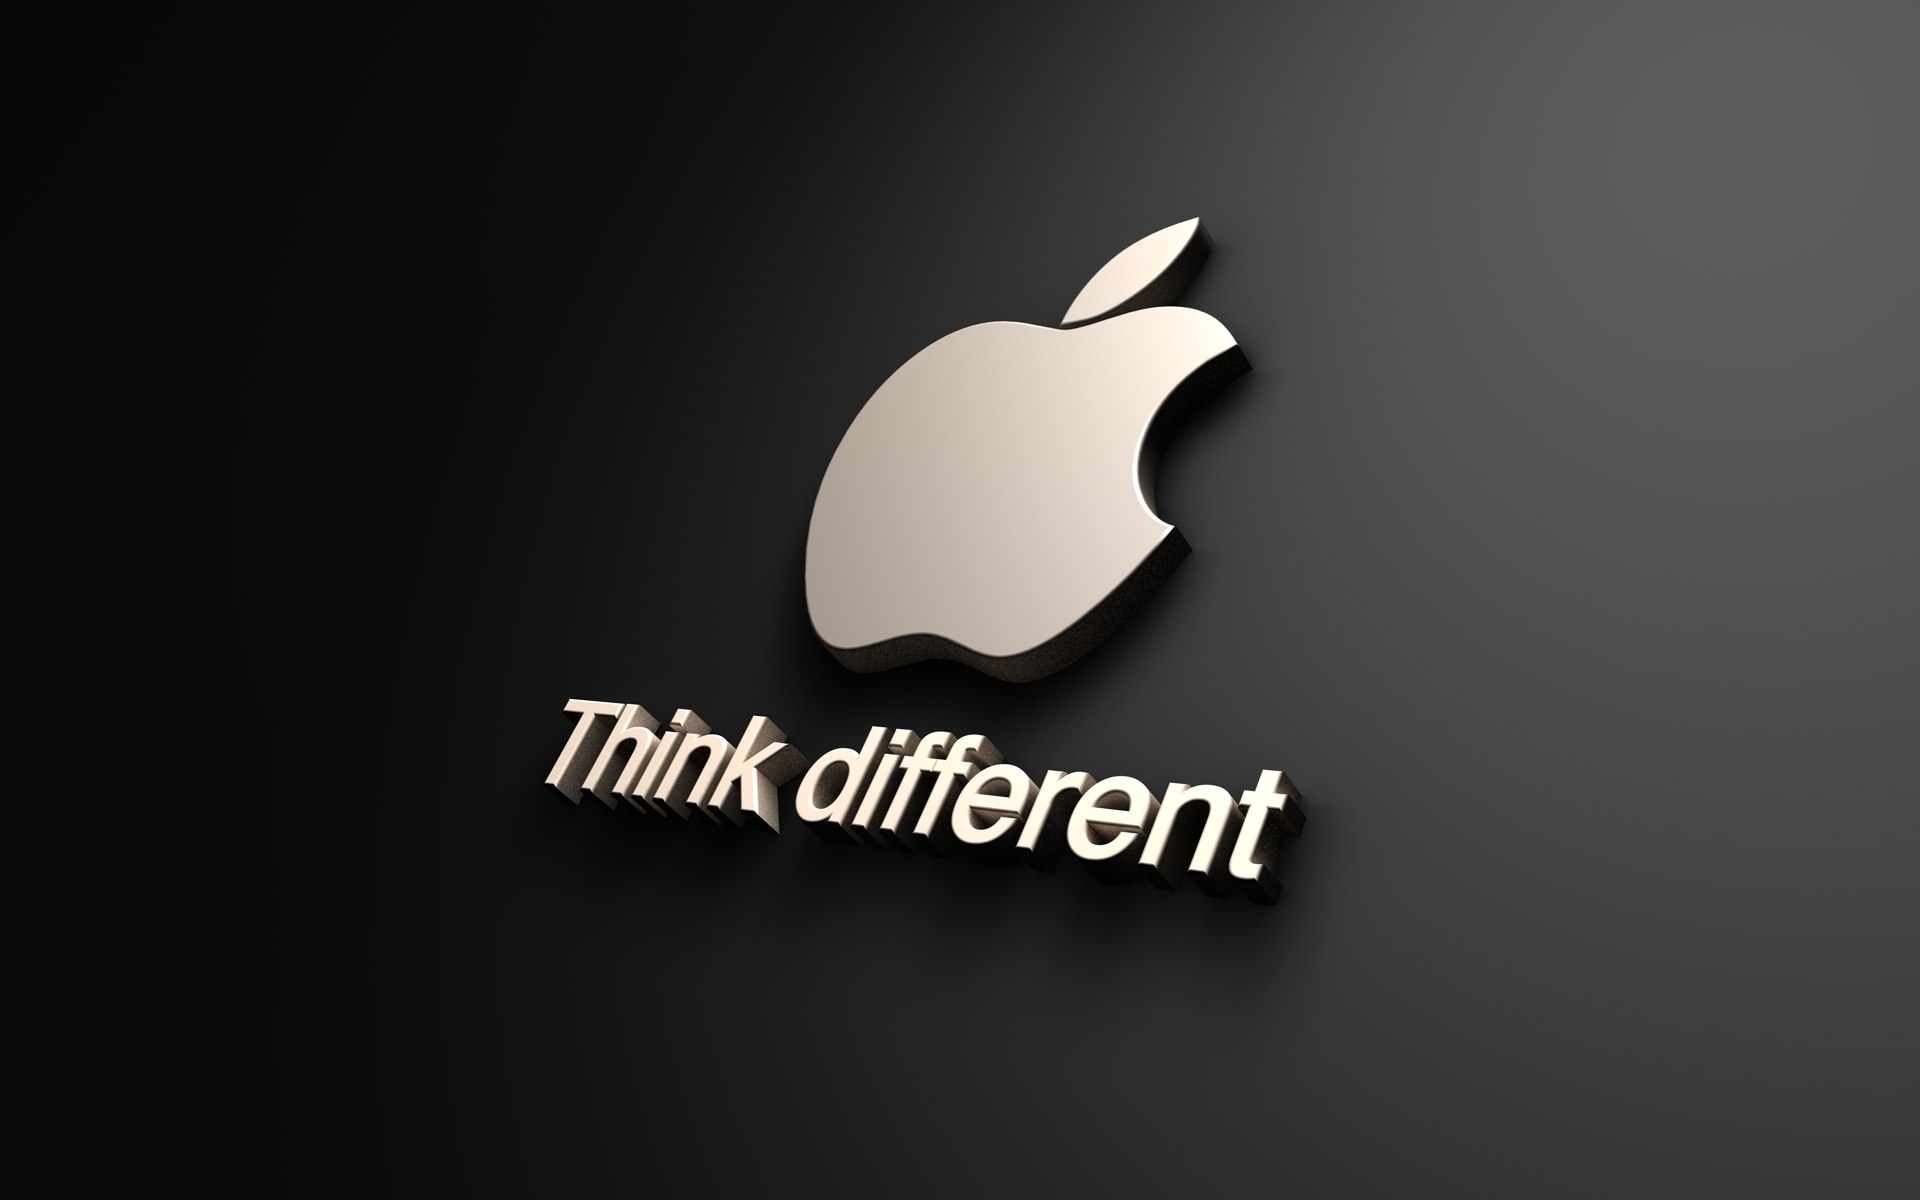 Cool, logo, background, apple, different, media, think